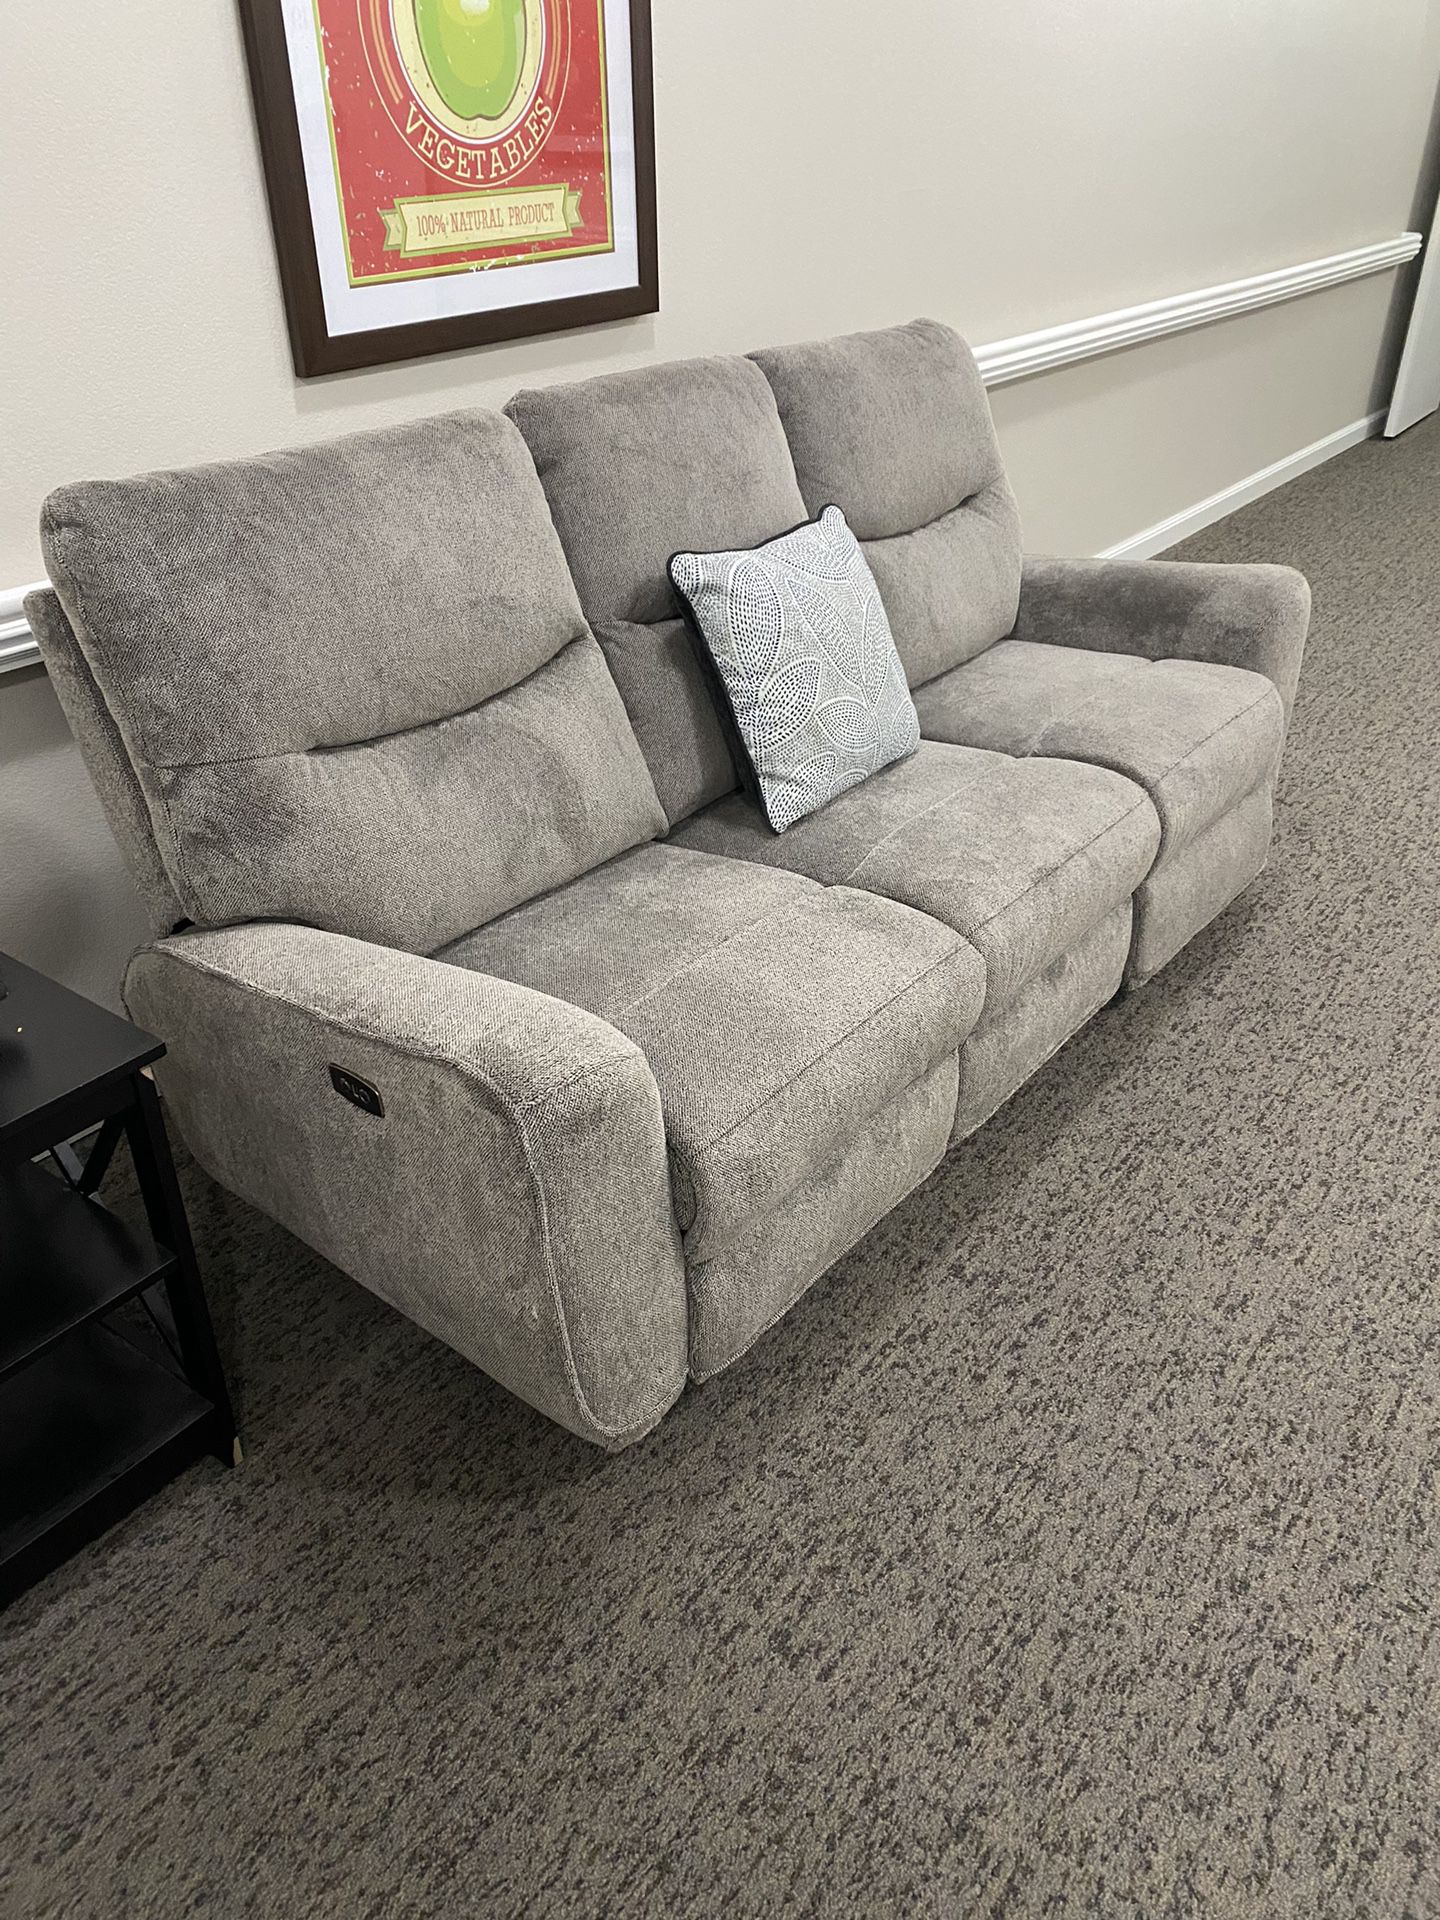 Brand New Recliner!!!!!*** $150!!!! This is a Steal!!